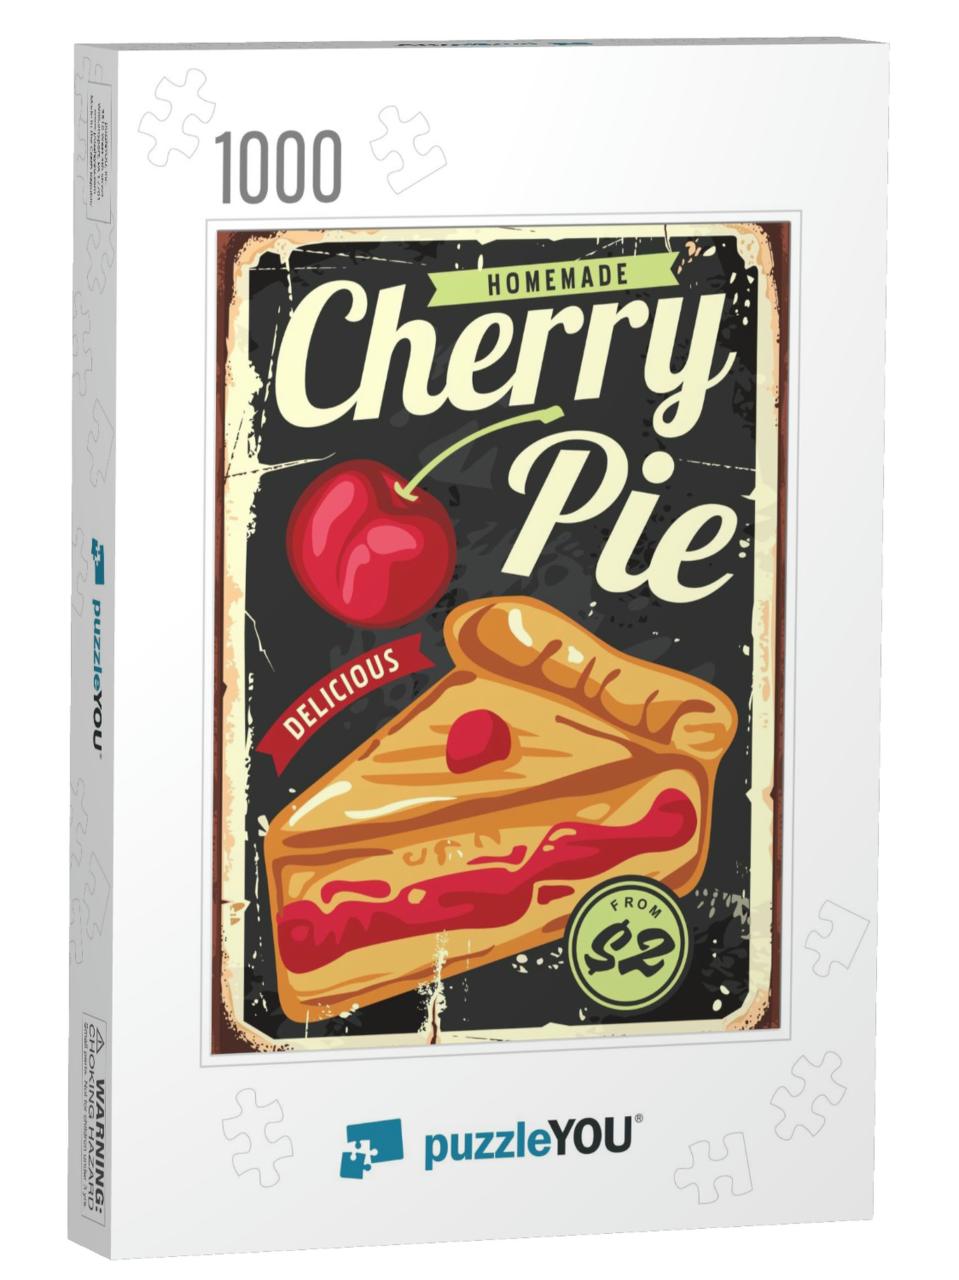 Homemade Cherry Pie Vintage Sign Decor Template. Retro Po... Jigsaw Puzzle with 1000 pieces